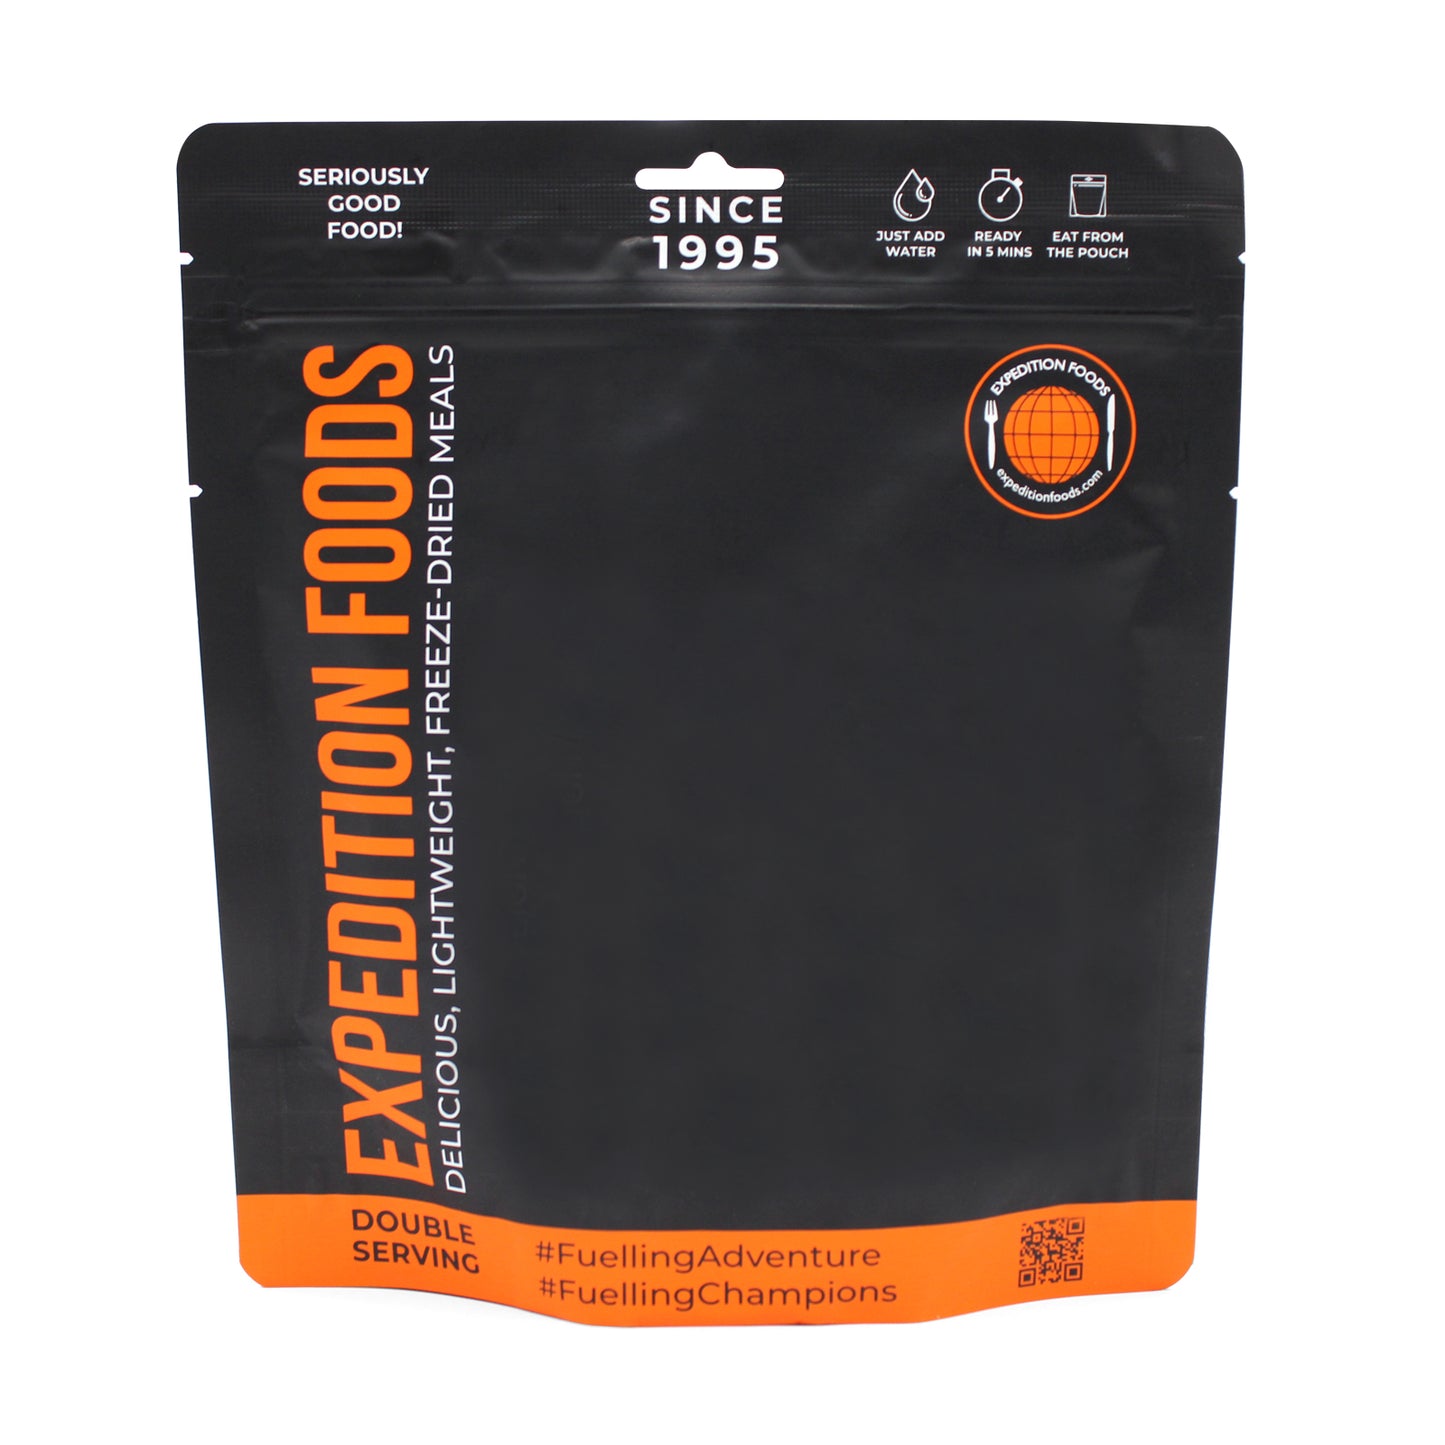 Expedition Foods Packaging